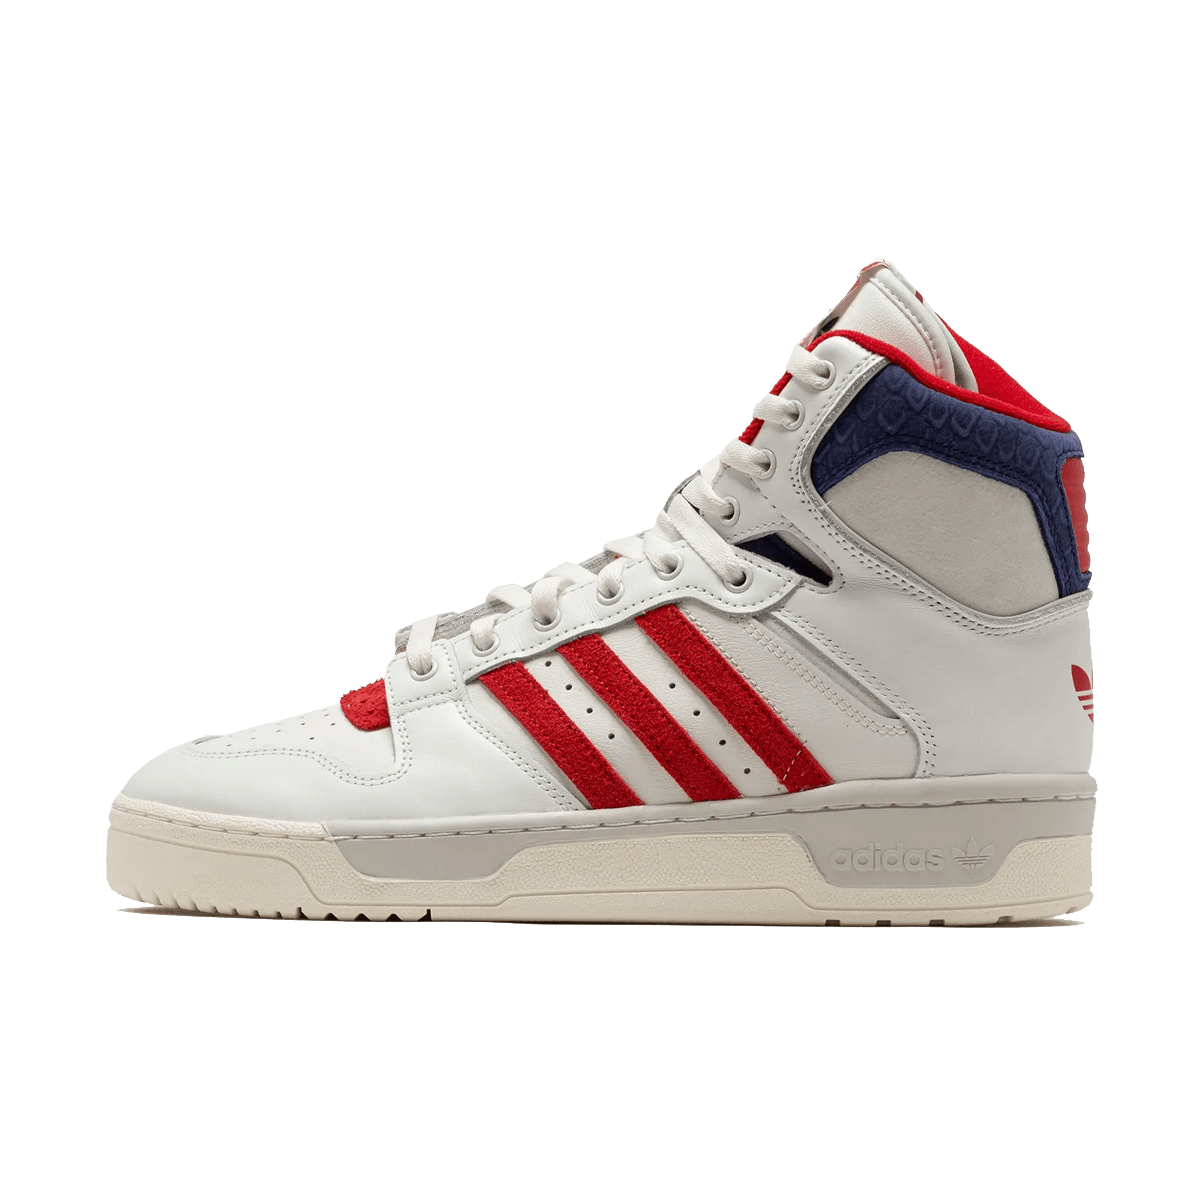 adidas Conductor Hi - The Collective Pack IE9938